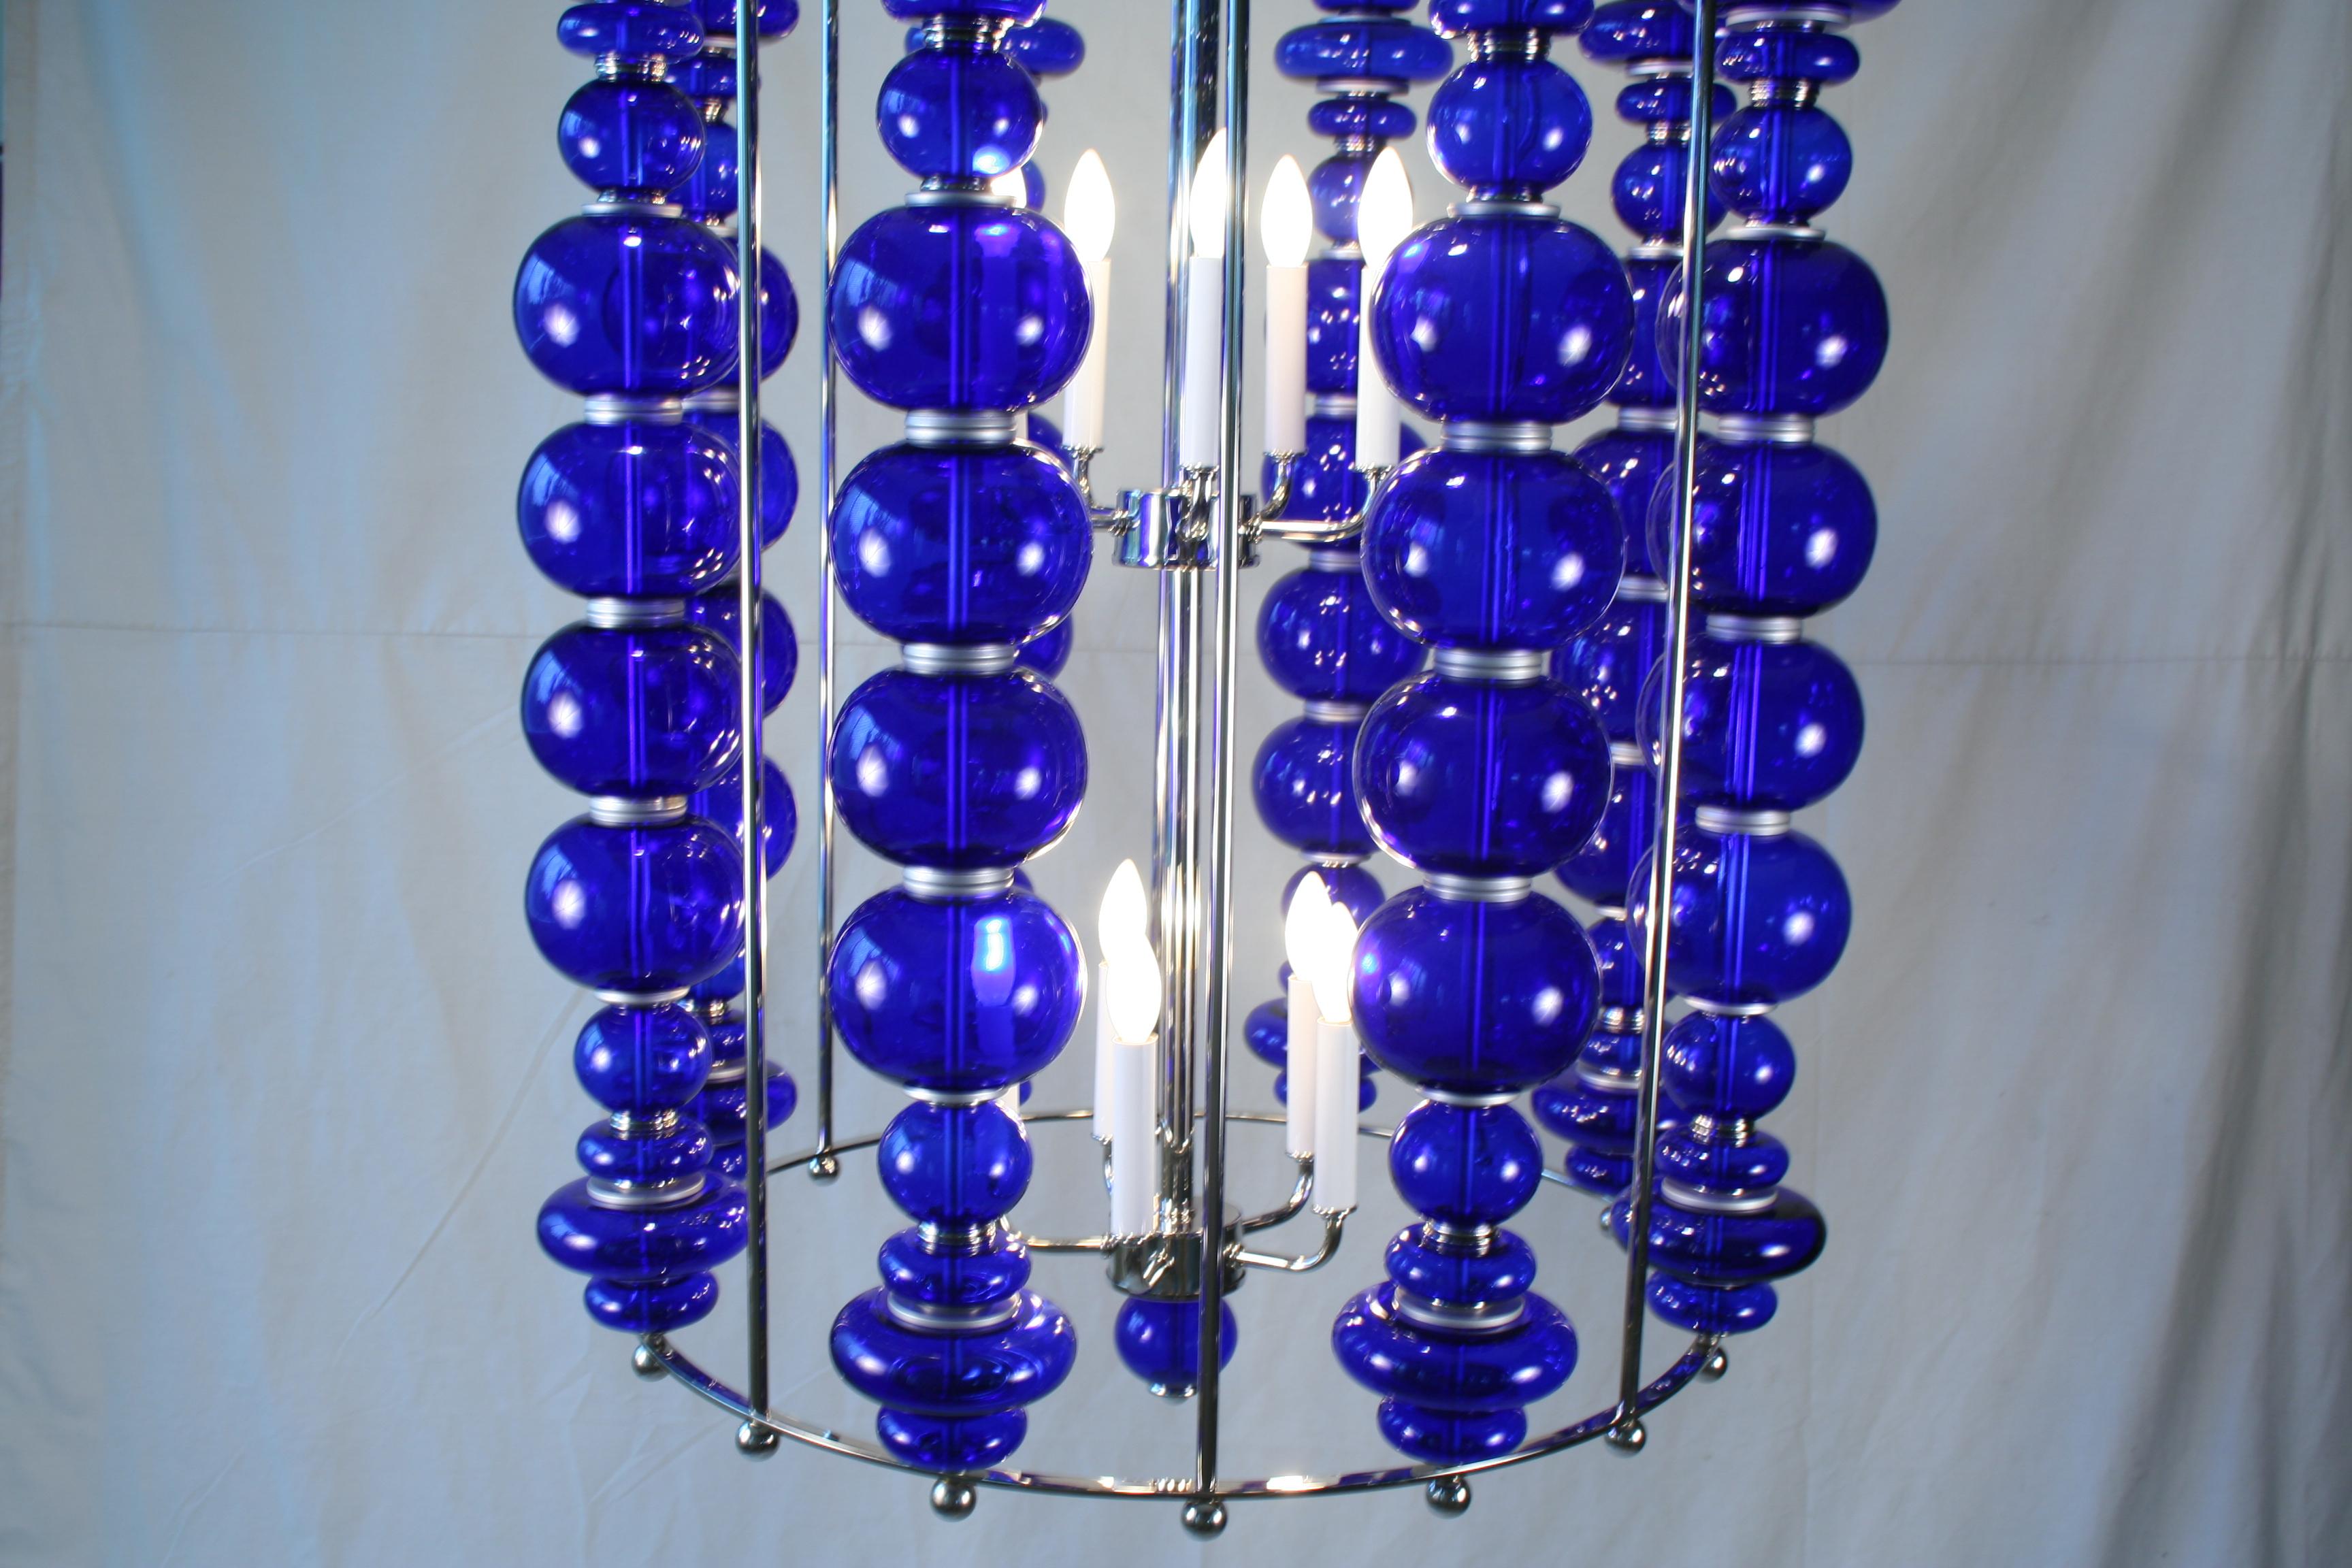 Custom designed and custom made modern chandelier. Cobalt blue glass spheres made in India. shades in 4 different shapes all stacked to form a circle of Blue. On Hi-polished nickel frame made of brass and steel. Double light cluster bodies with